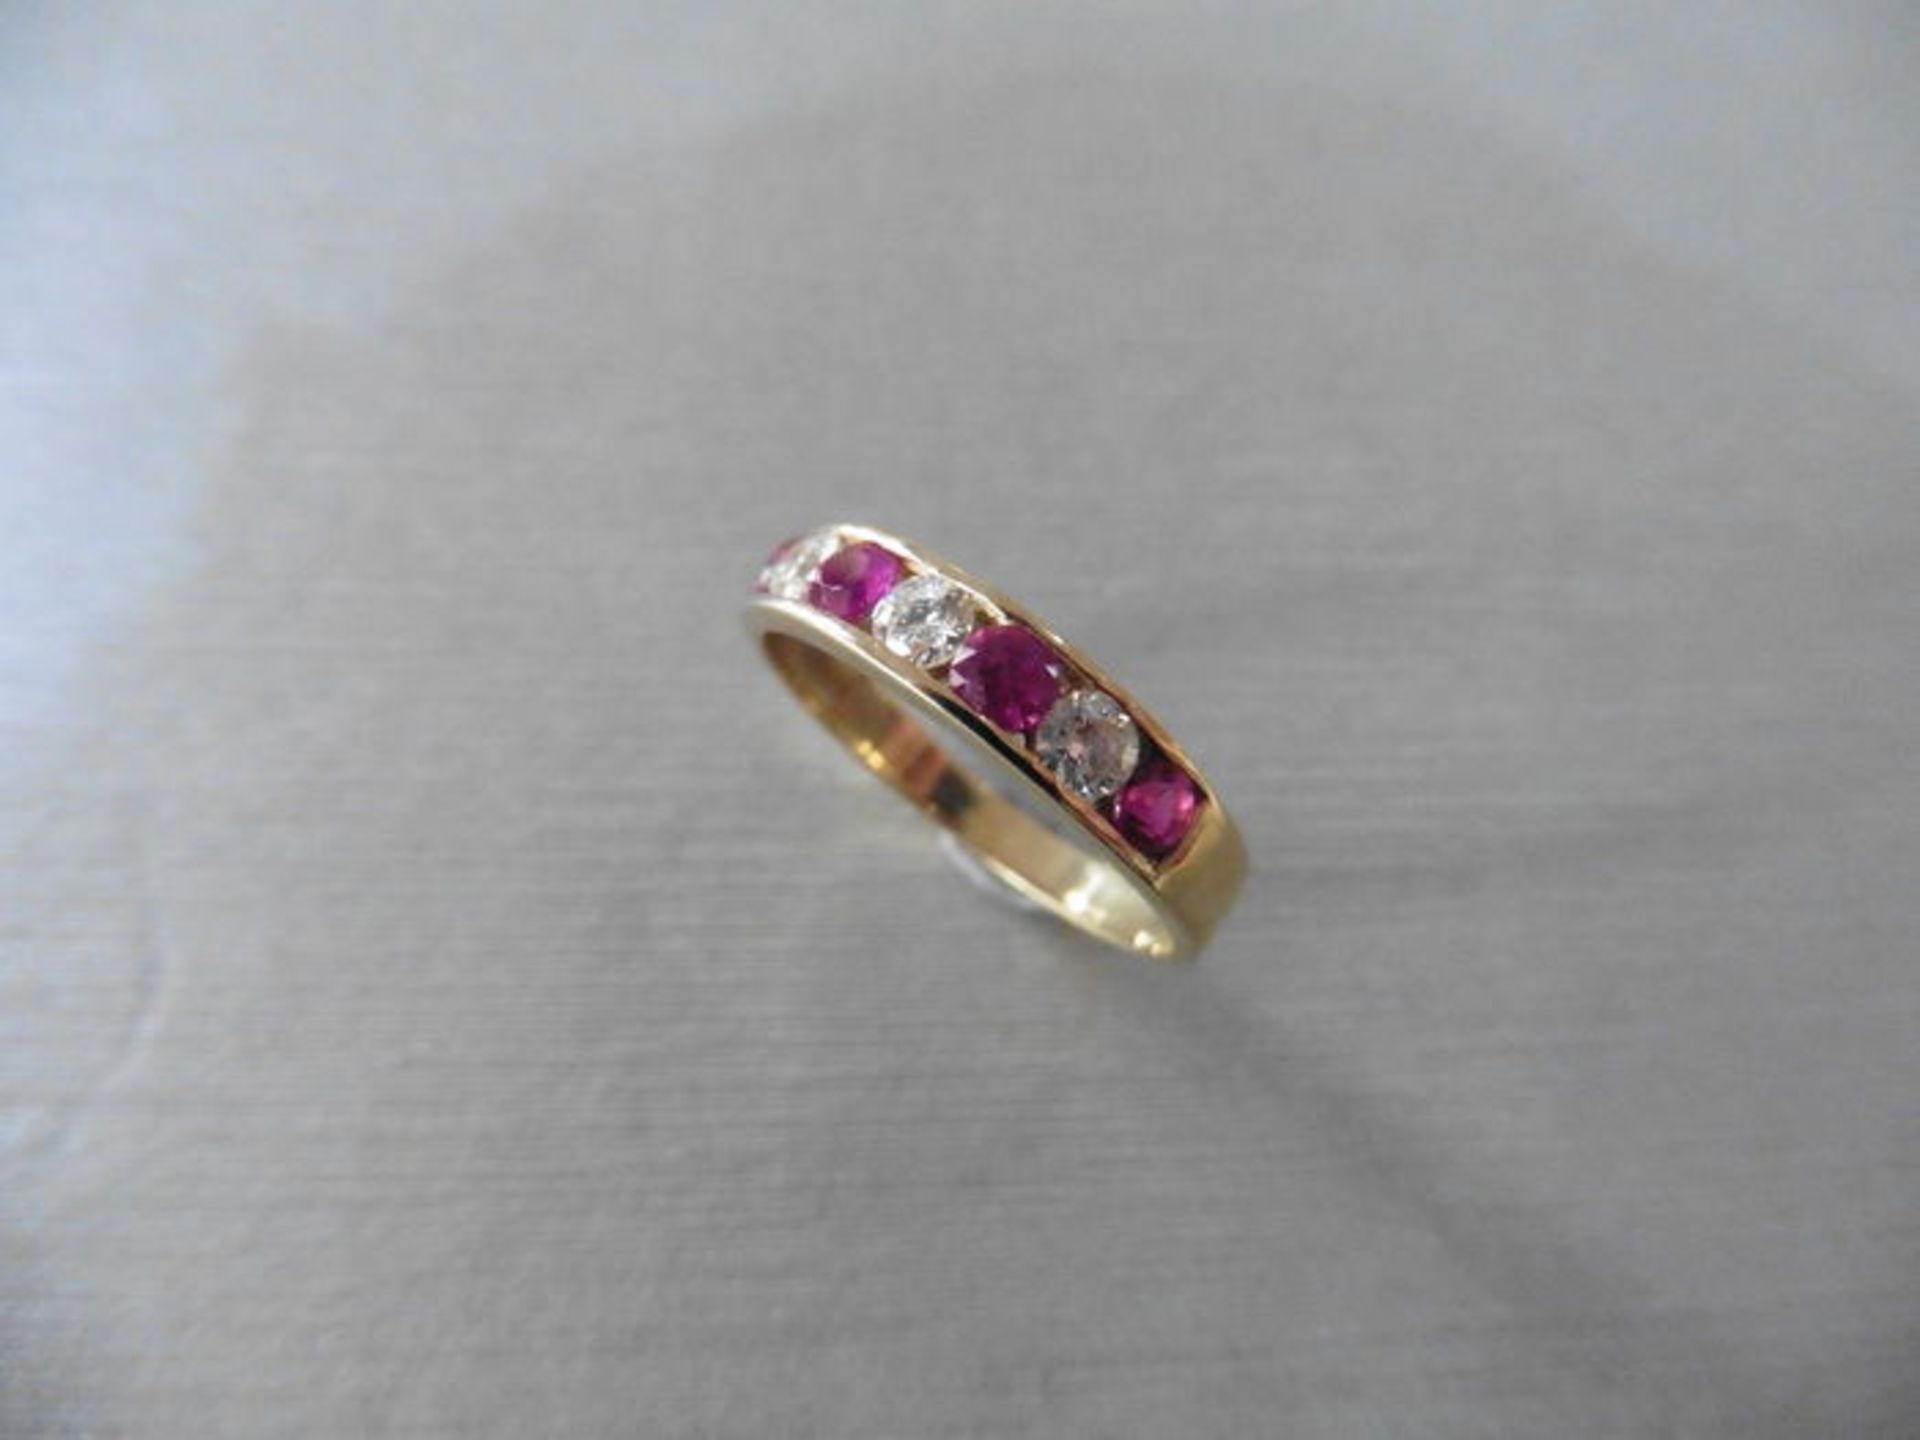 Ruby and diamond eternity band ring set in 9ct yellow gold. 4 small round cut rubies ( treated ) 0.